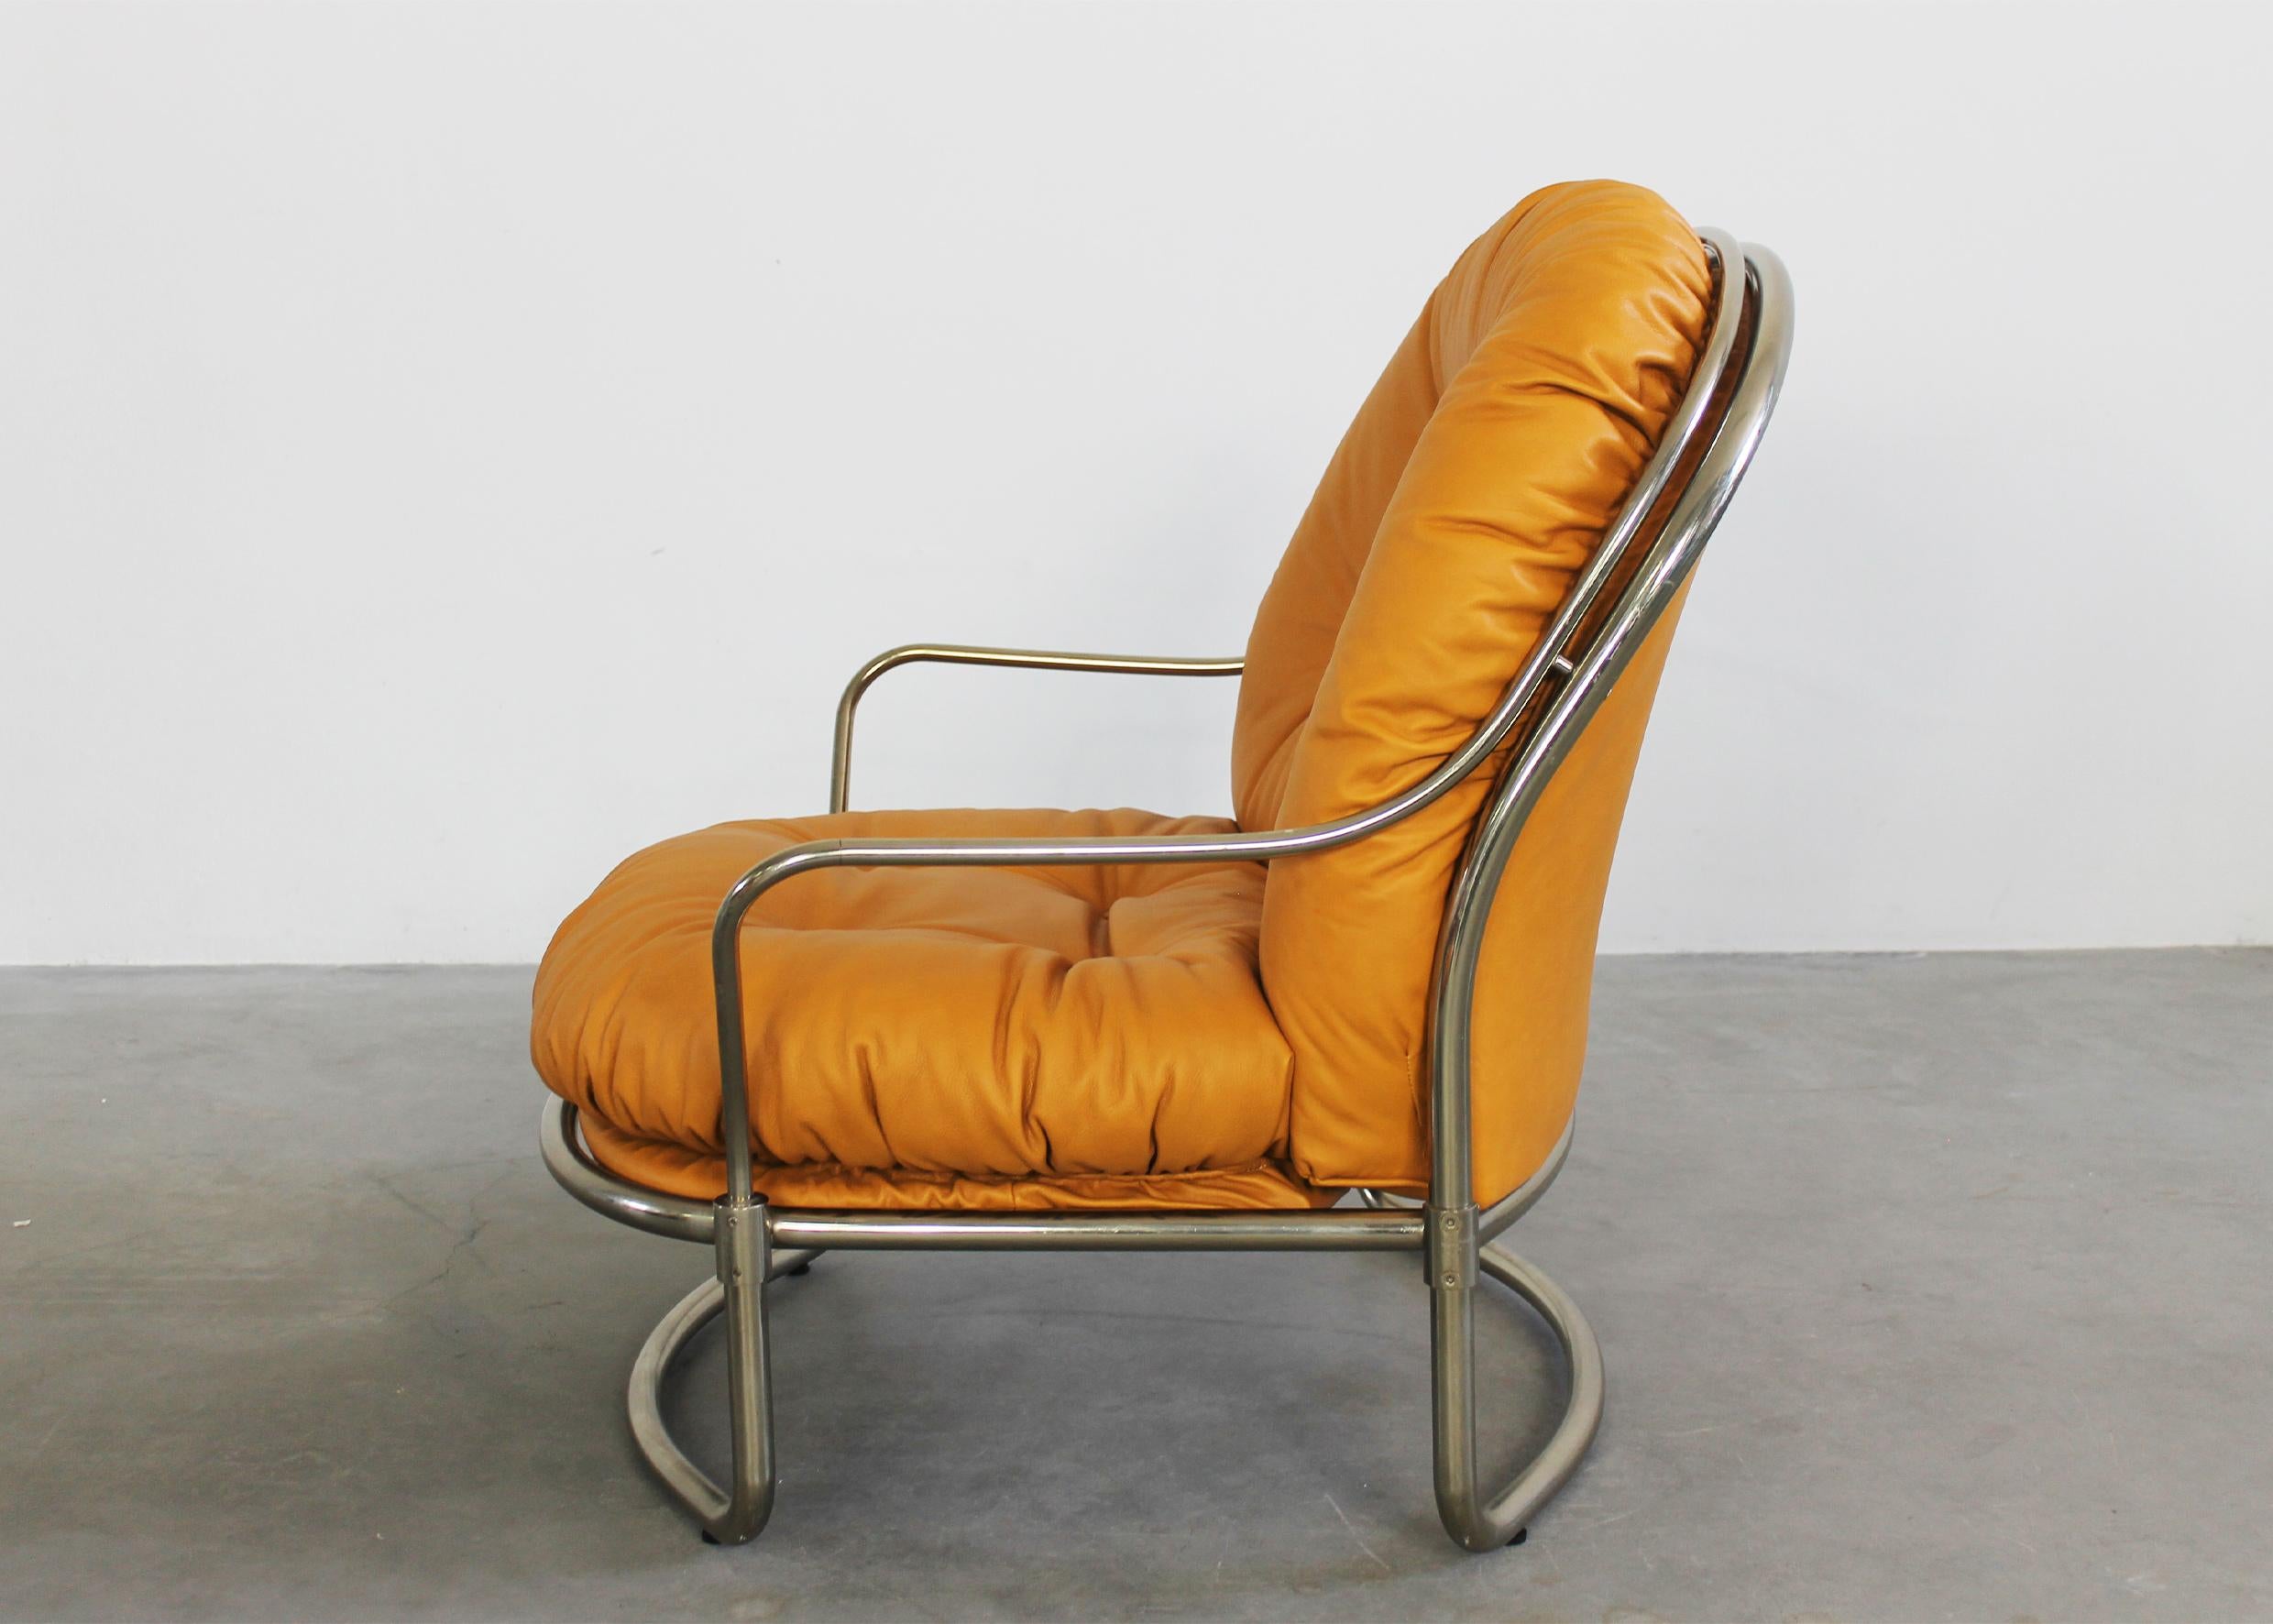 Carlo de Carli 915 Armchair with Footrest in Metal and Leather by Cinova 1970s For Sale 1